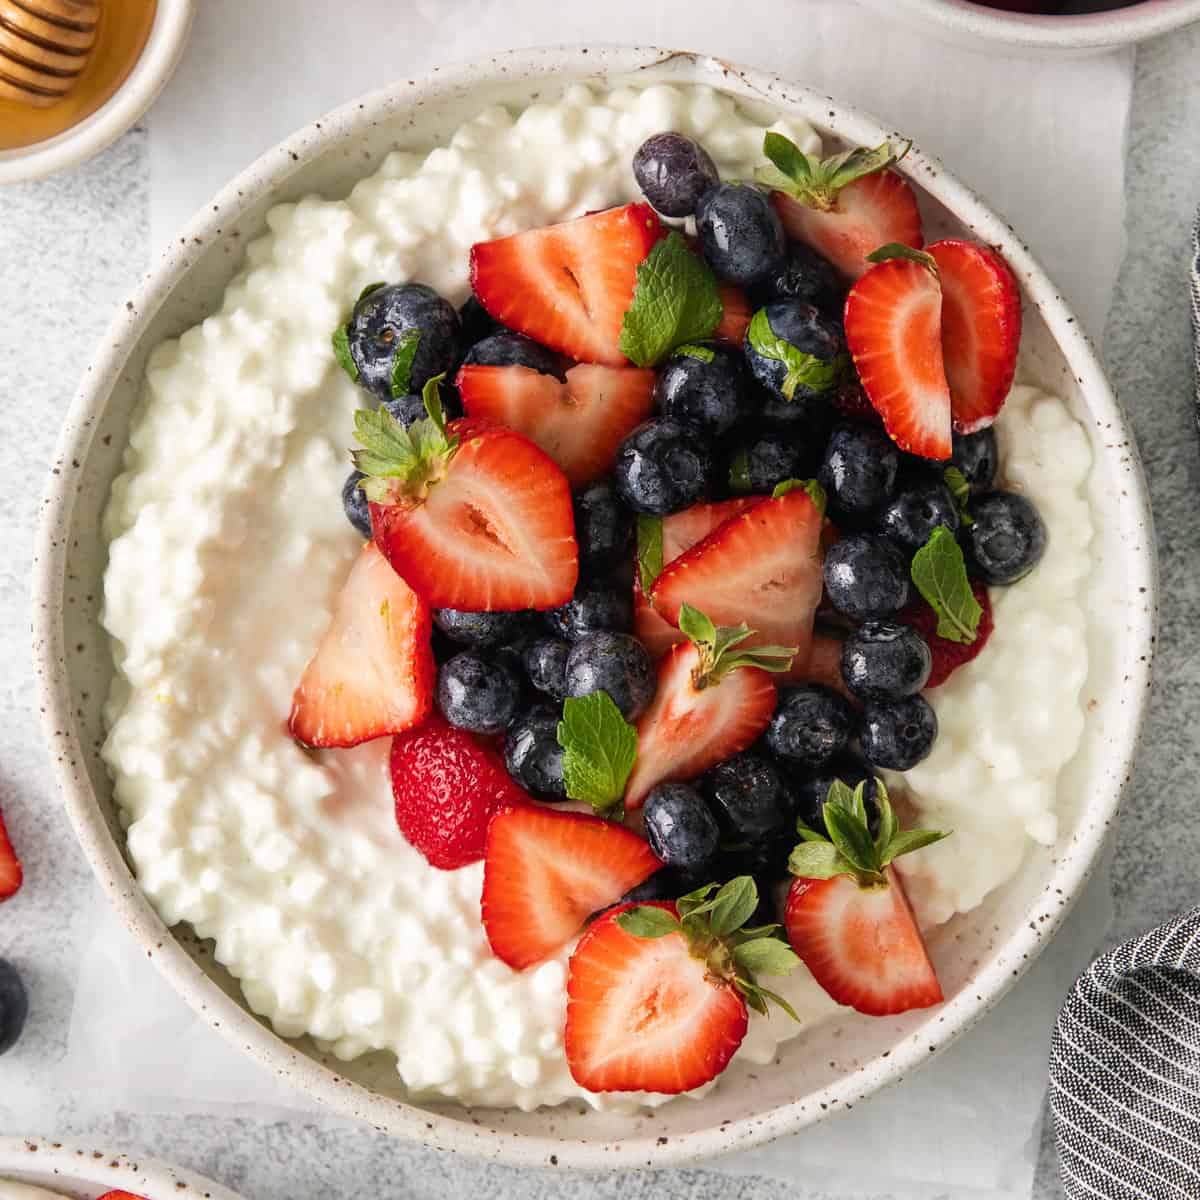 Cottage Cheese Breakfast Bowl